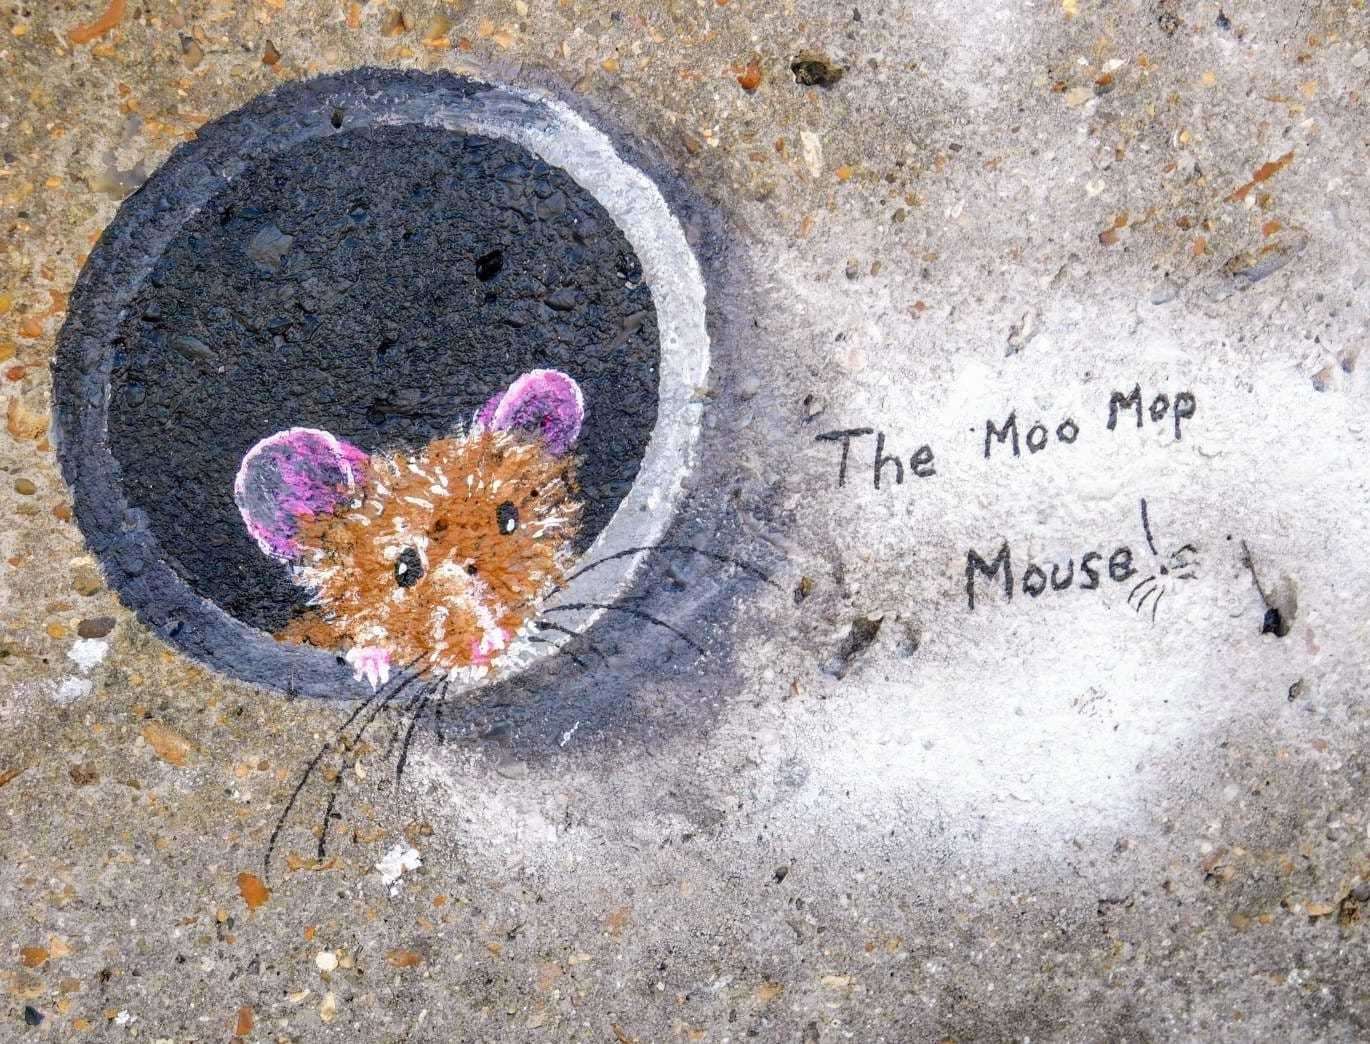 Sheppey's Moo Mop Mouse polings its head out of a drain on Sheerness seafront. Picture: Yvonne Youd (42449736)